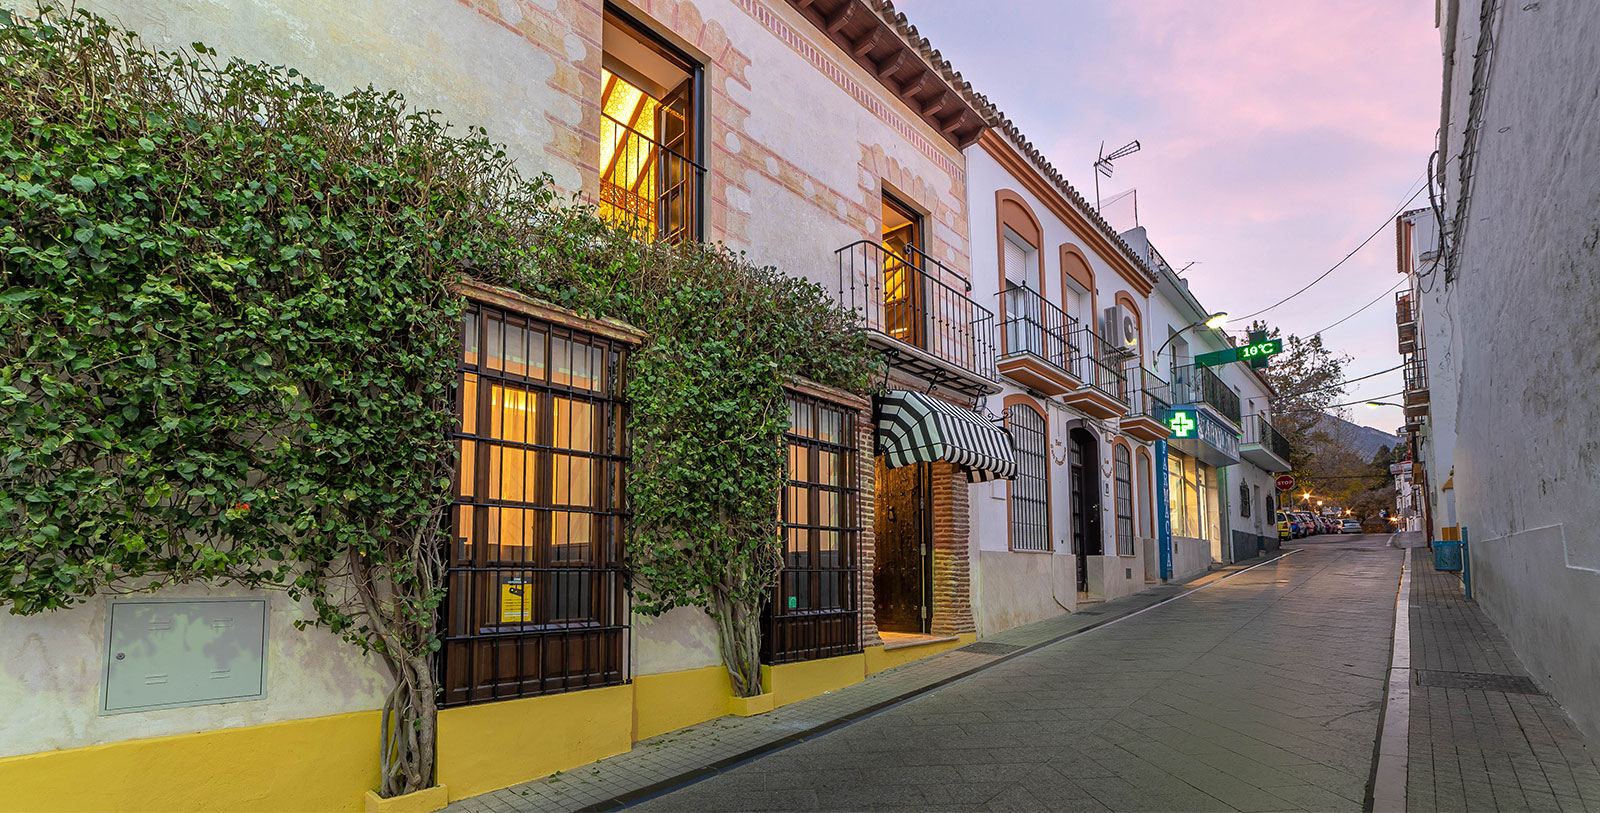 Image of Hotel Claude Marbella, 17th century, a Member of Historic Hotels Worldwide in Marbella, Spain, Special Offers, Discounted Rates, Families, Romantic Escape, Honeymoons, Anniversaries, Reunions